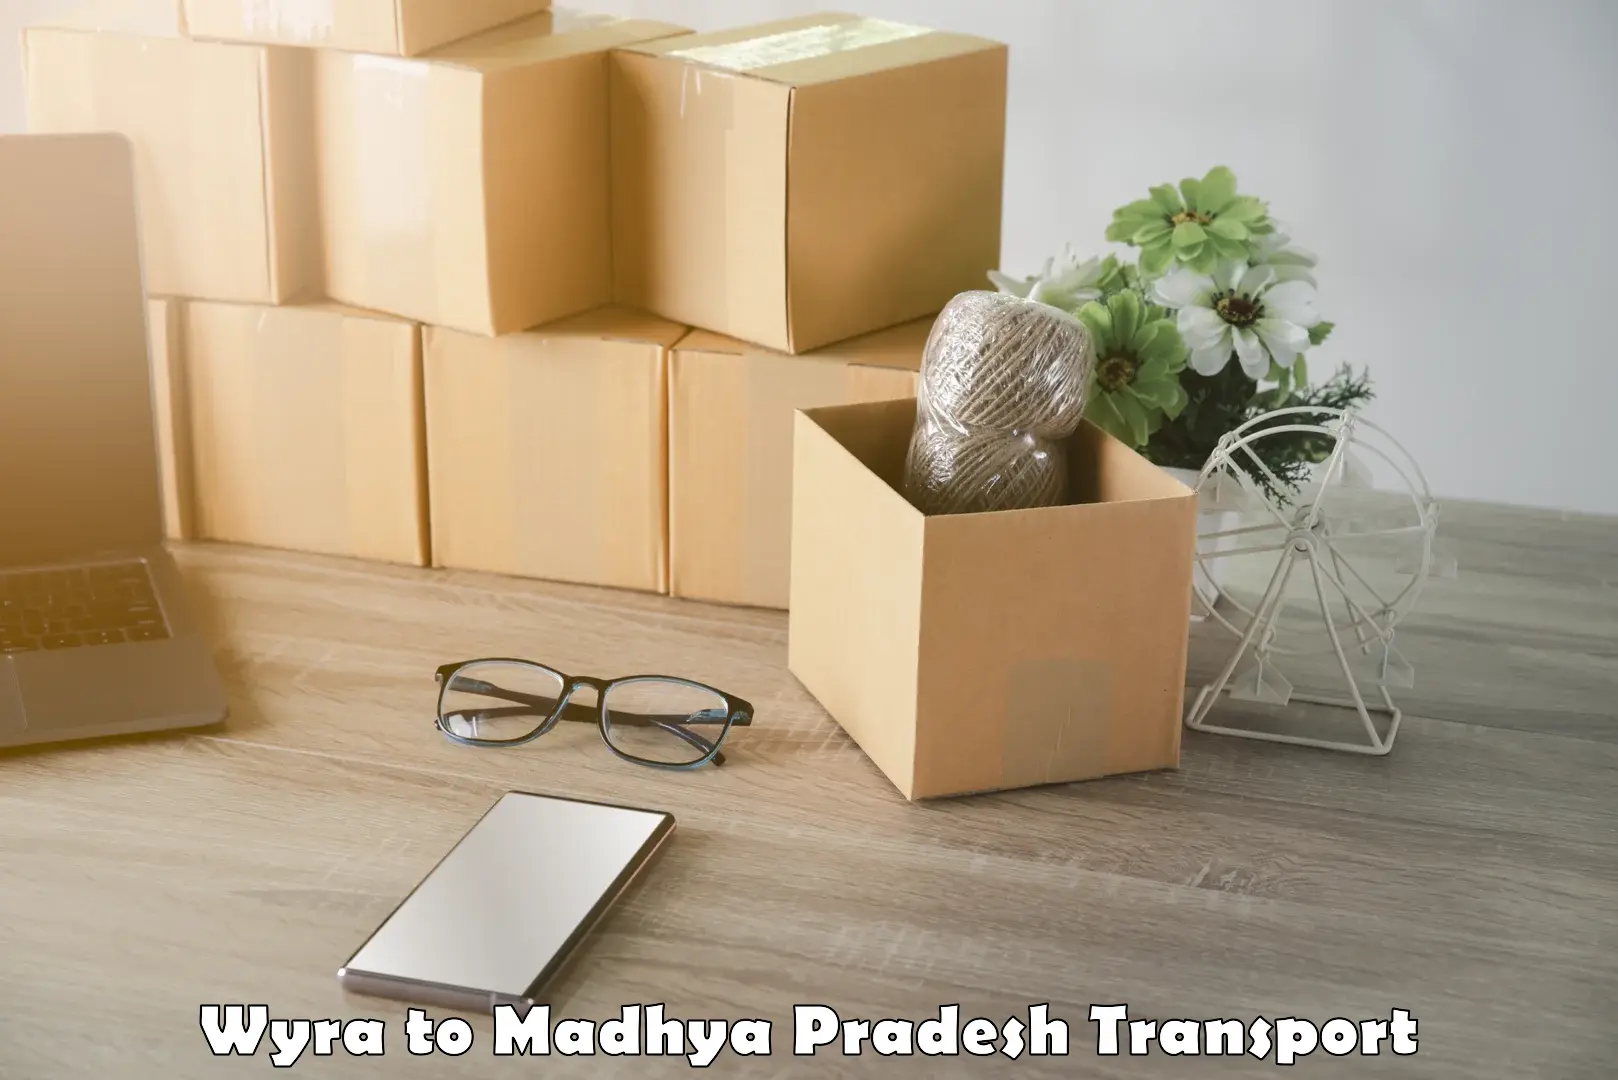 Truck transport companies in India Wyra to Indore